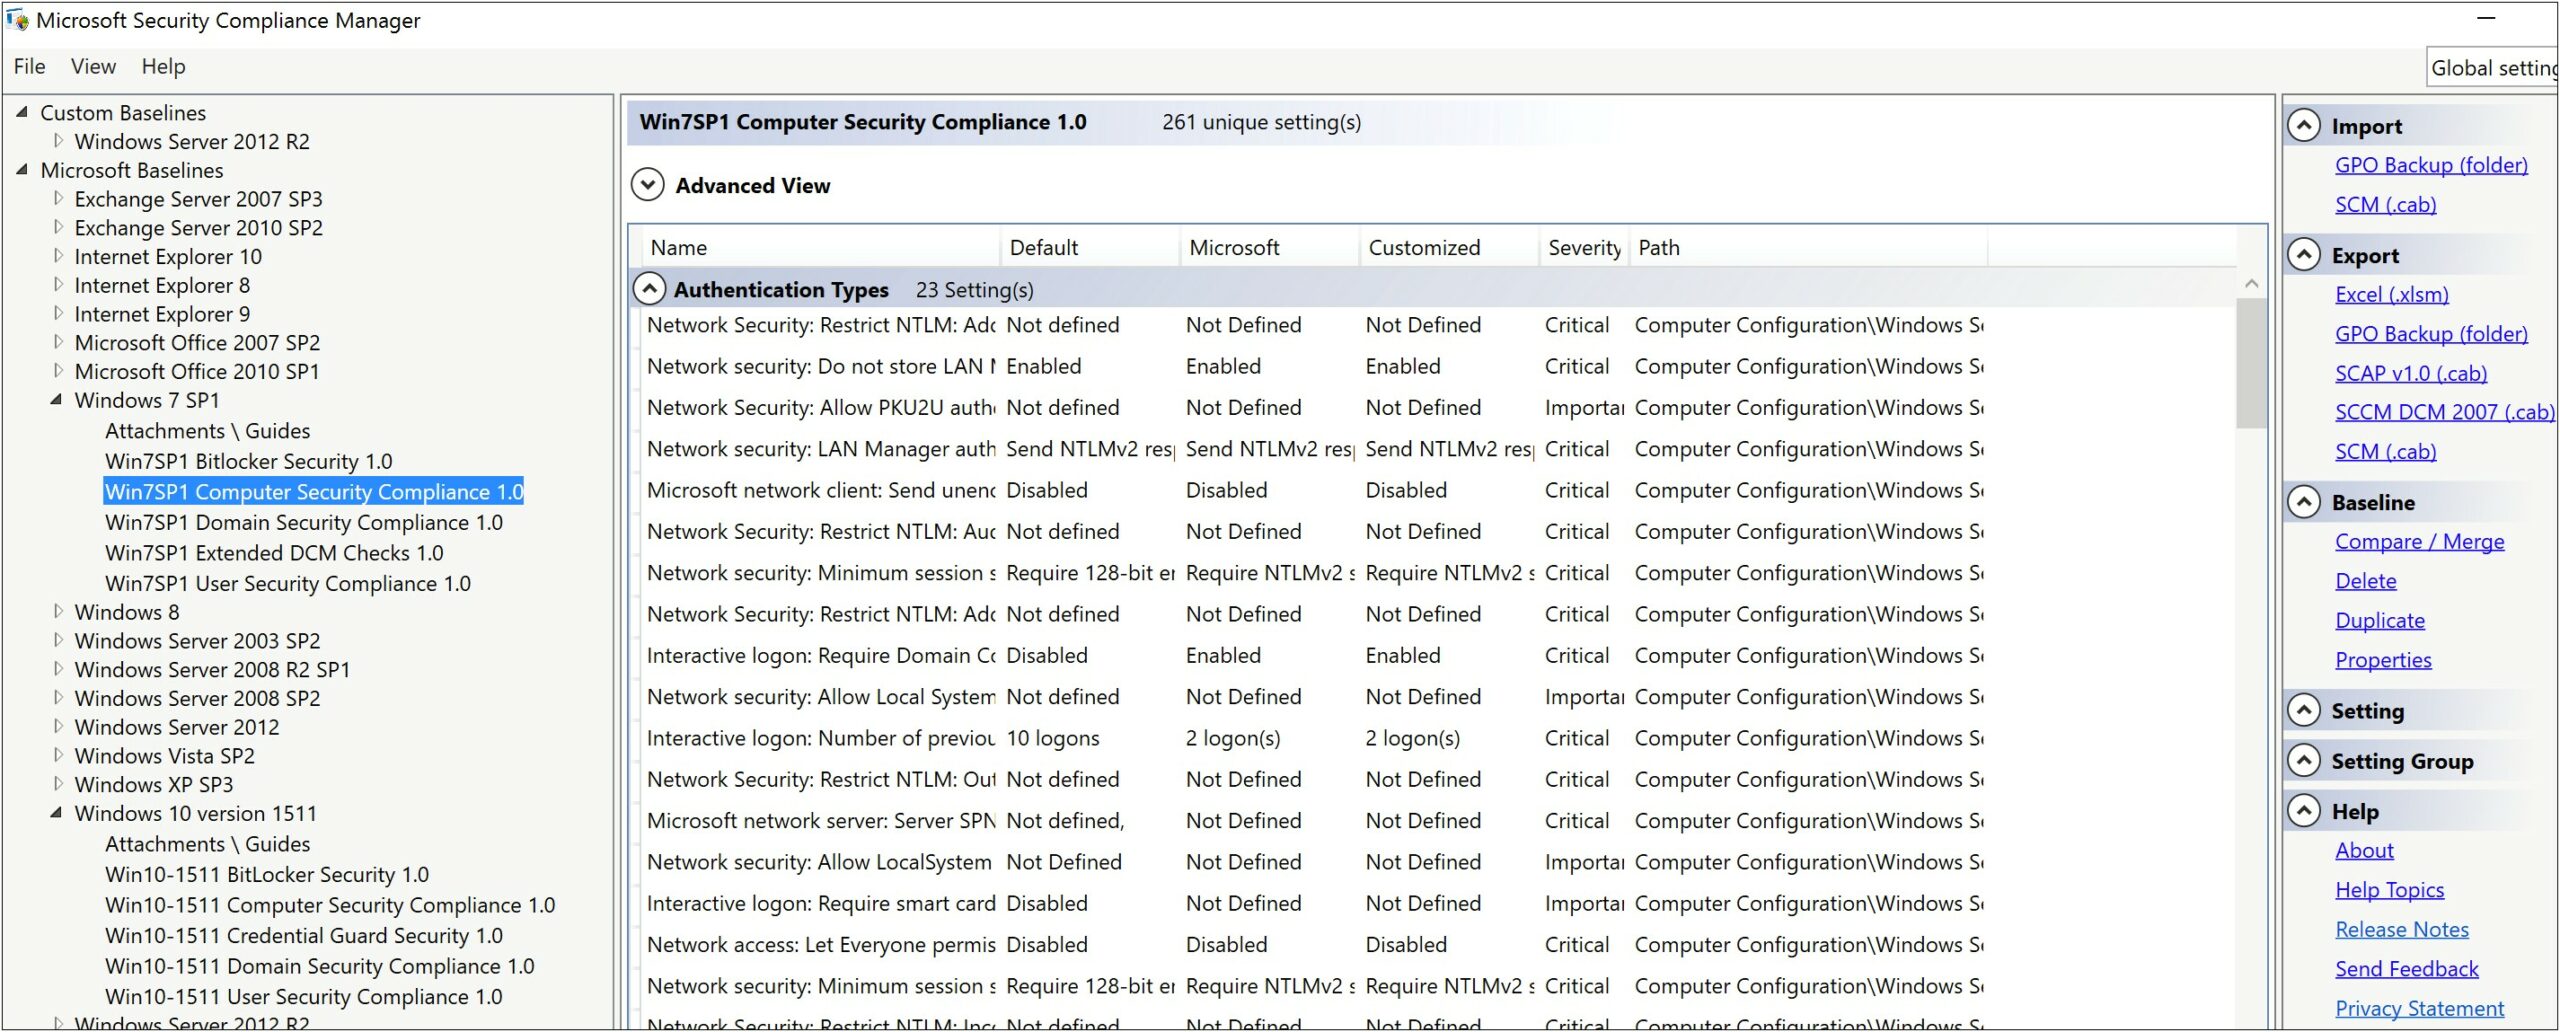 Windows 8.1 Group Policy Templates Download